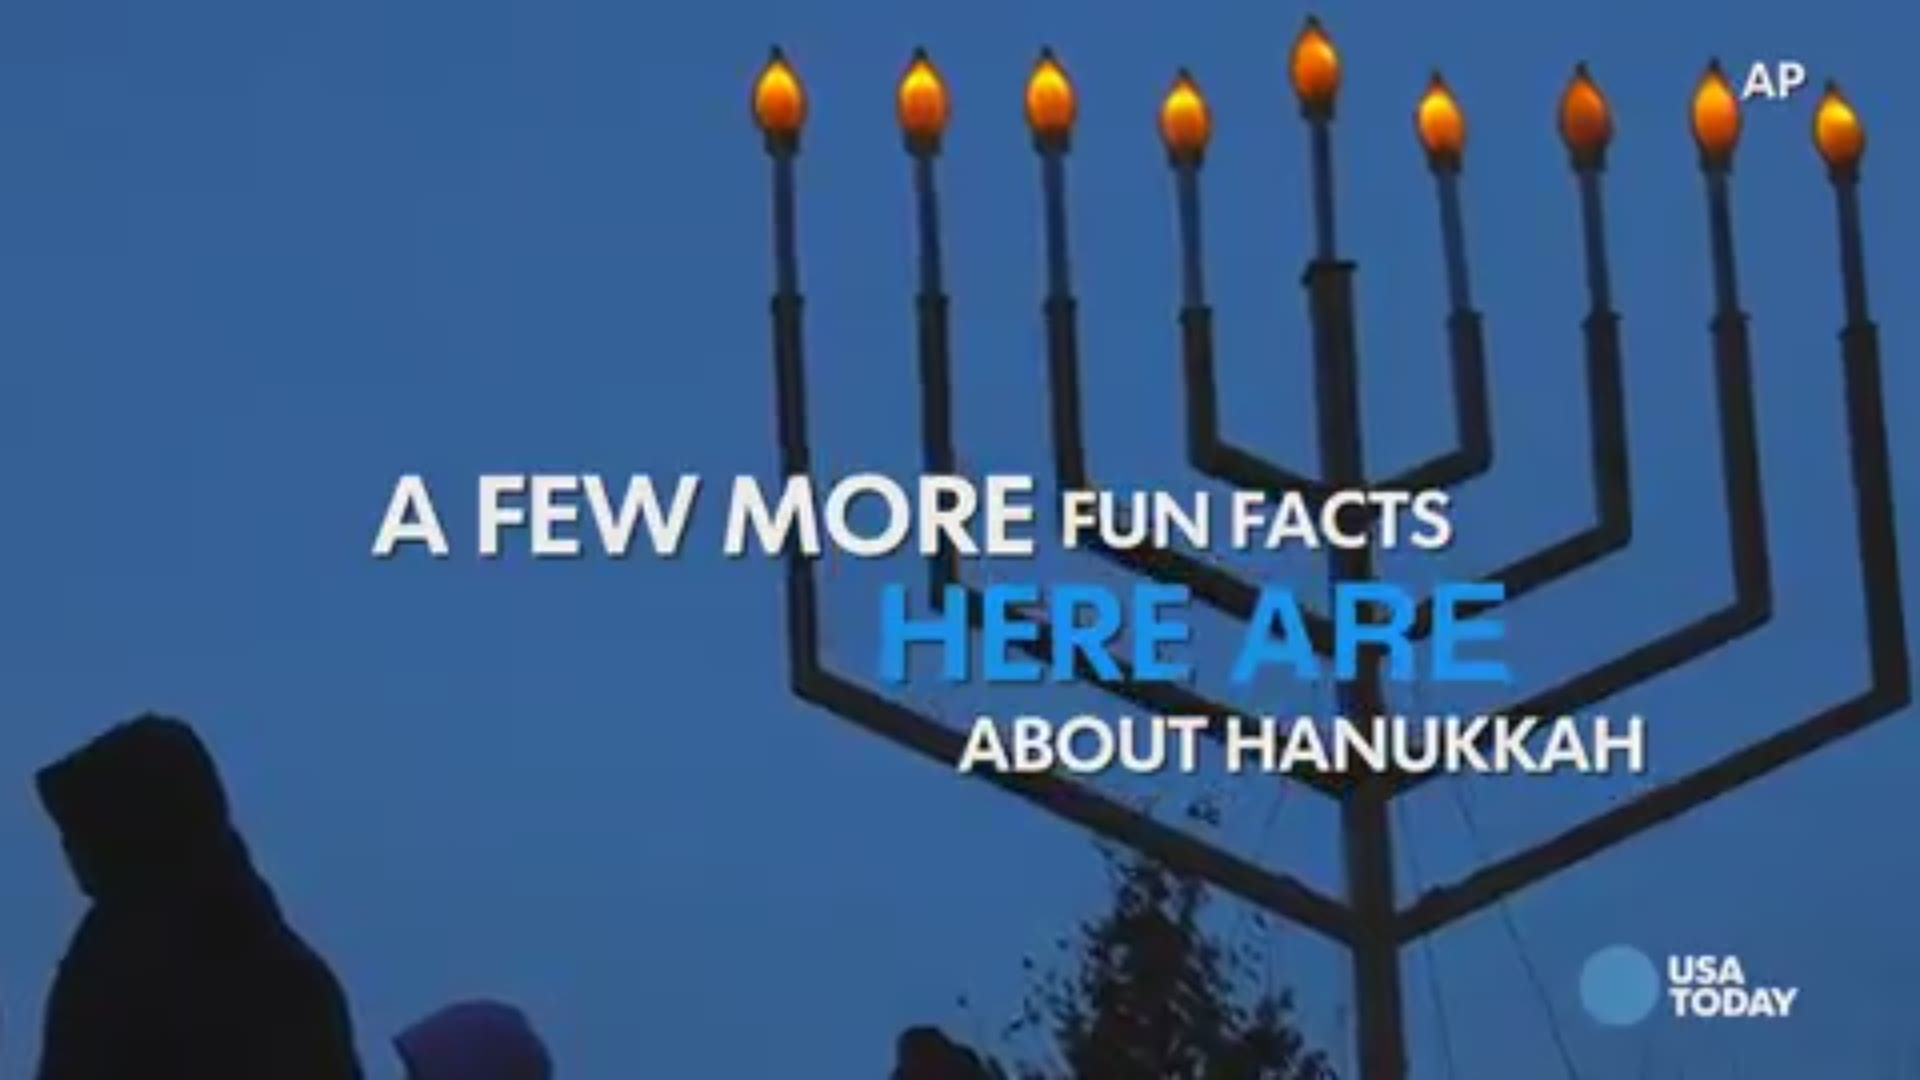 As the celebration of Hanukkah begins here are some fun facts about the holiday and its history. USA TODAY